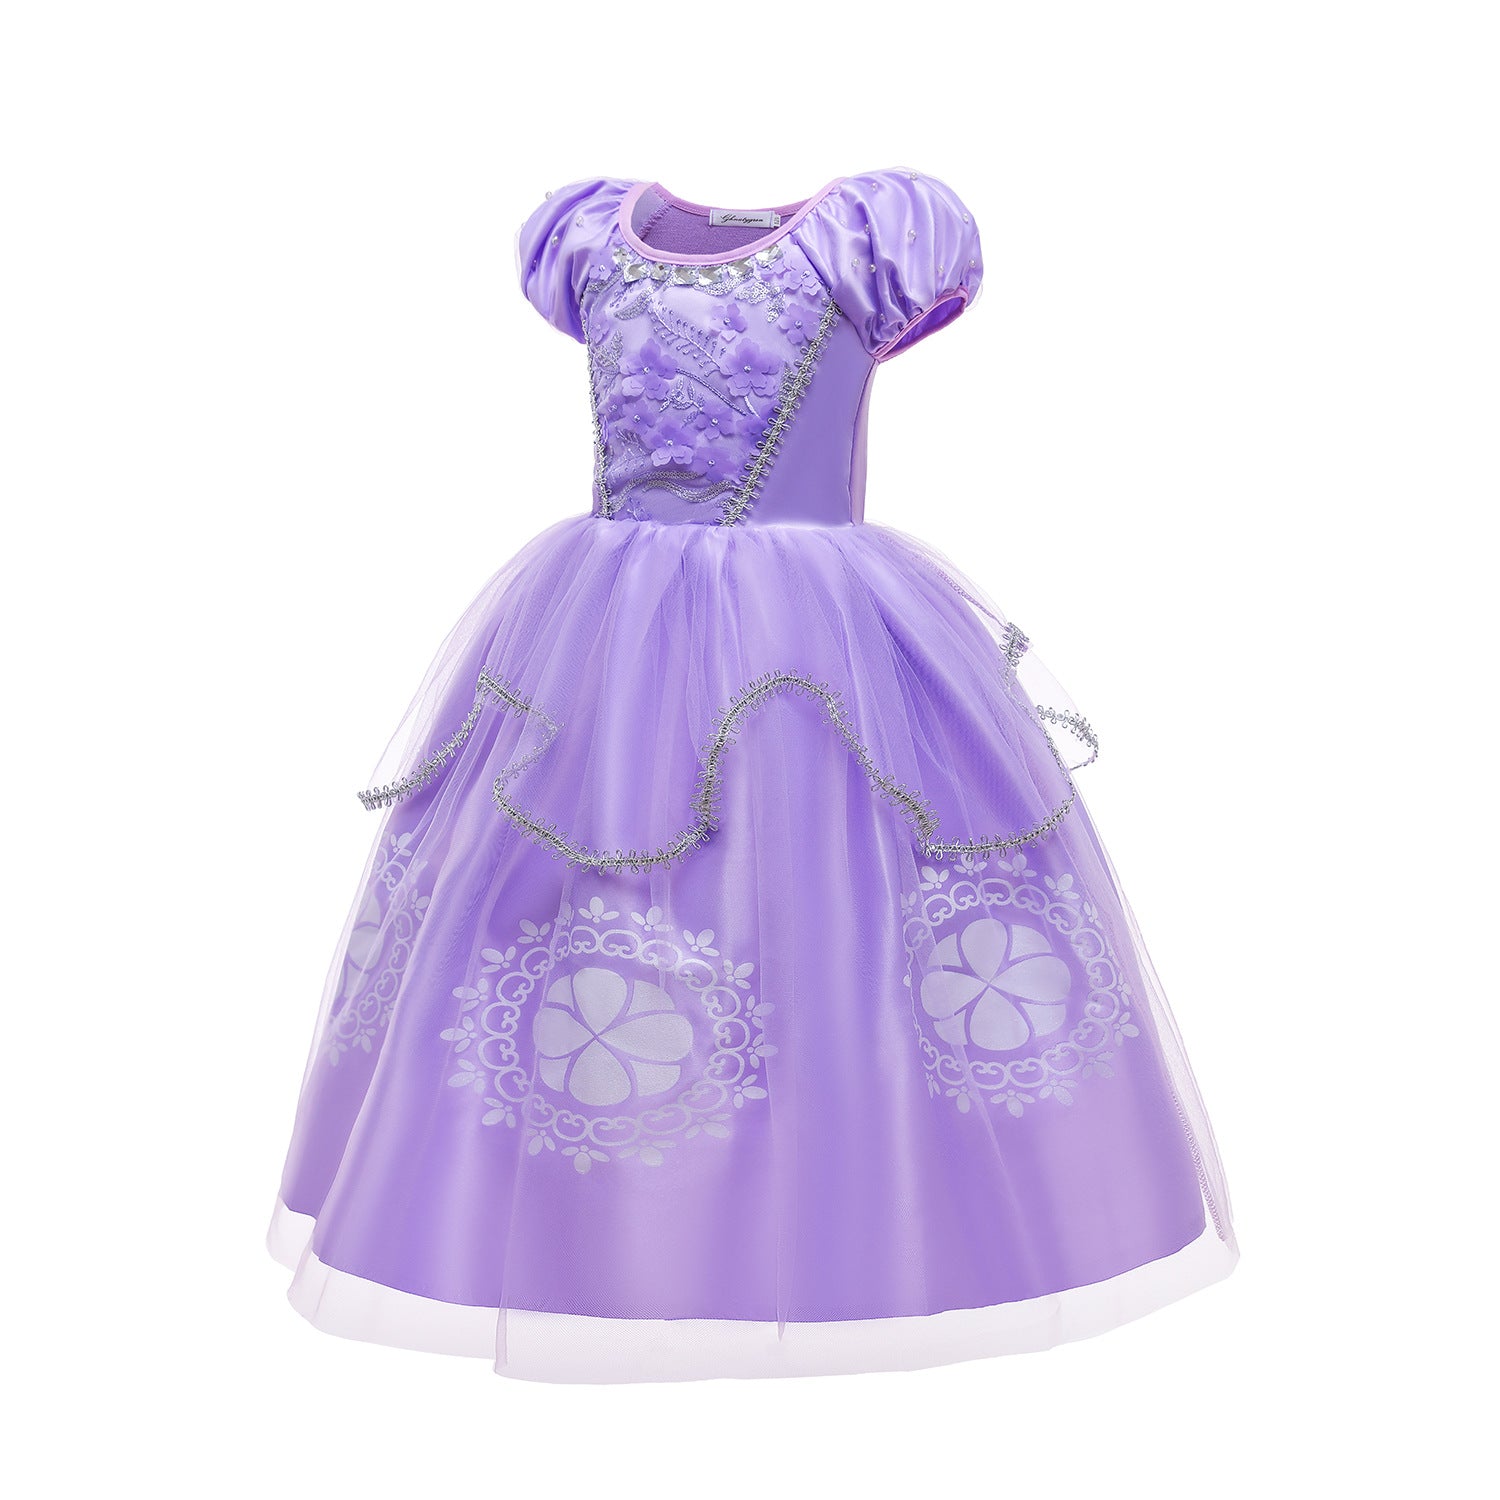 Flower Girls Dresses New Princess Sofia Costume Dresses For Cosplay Party Holiday Wedding